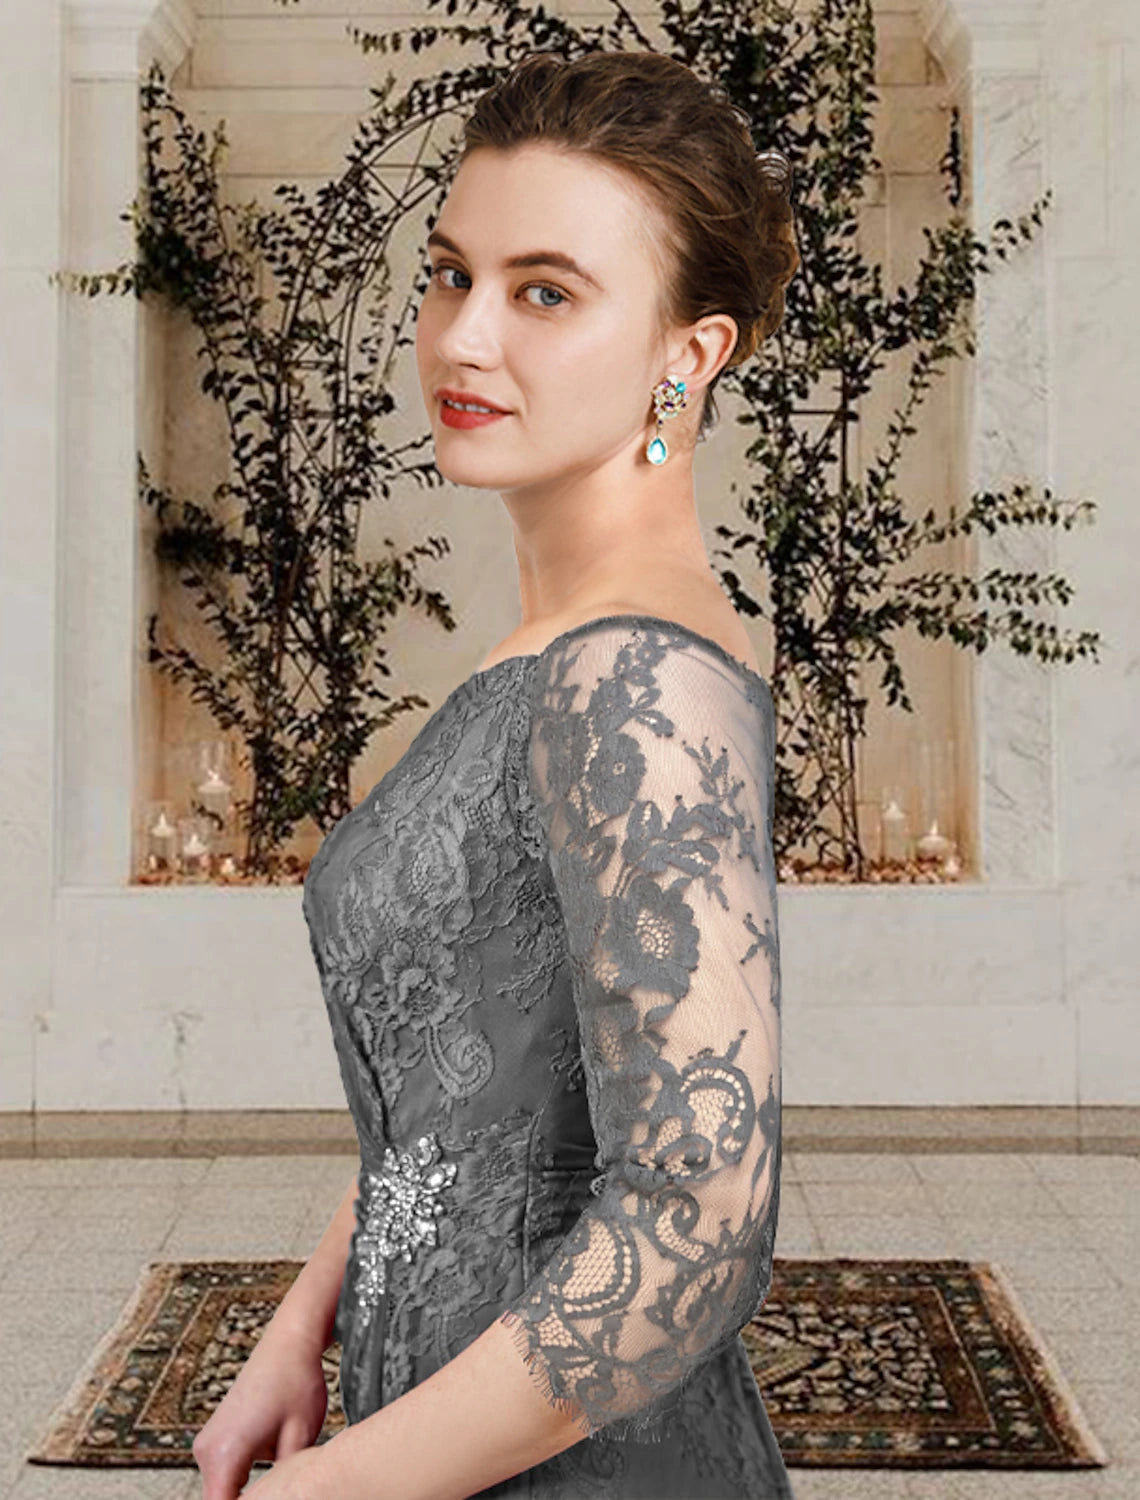 A-Line Mother of the Bride Dress Wedding Guest Plus Size Elegant Jewel Neck Floor Length Lace Short Sleeve with Ruffles Crystal Brooch Side-Draped Fall